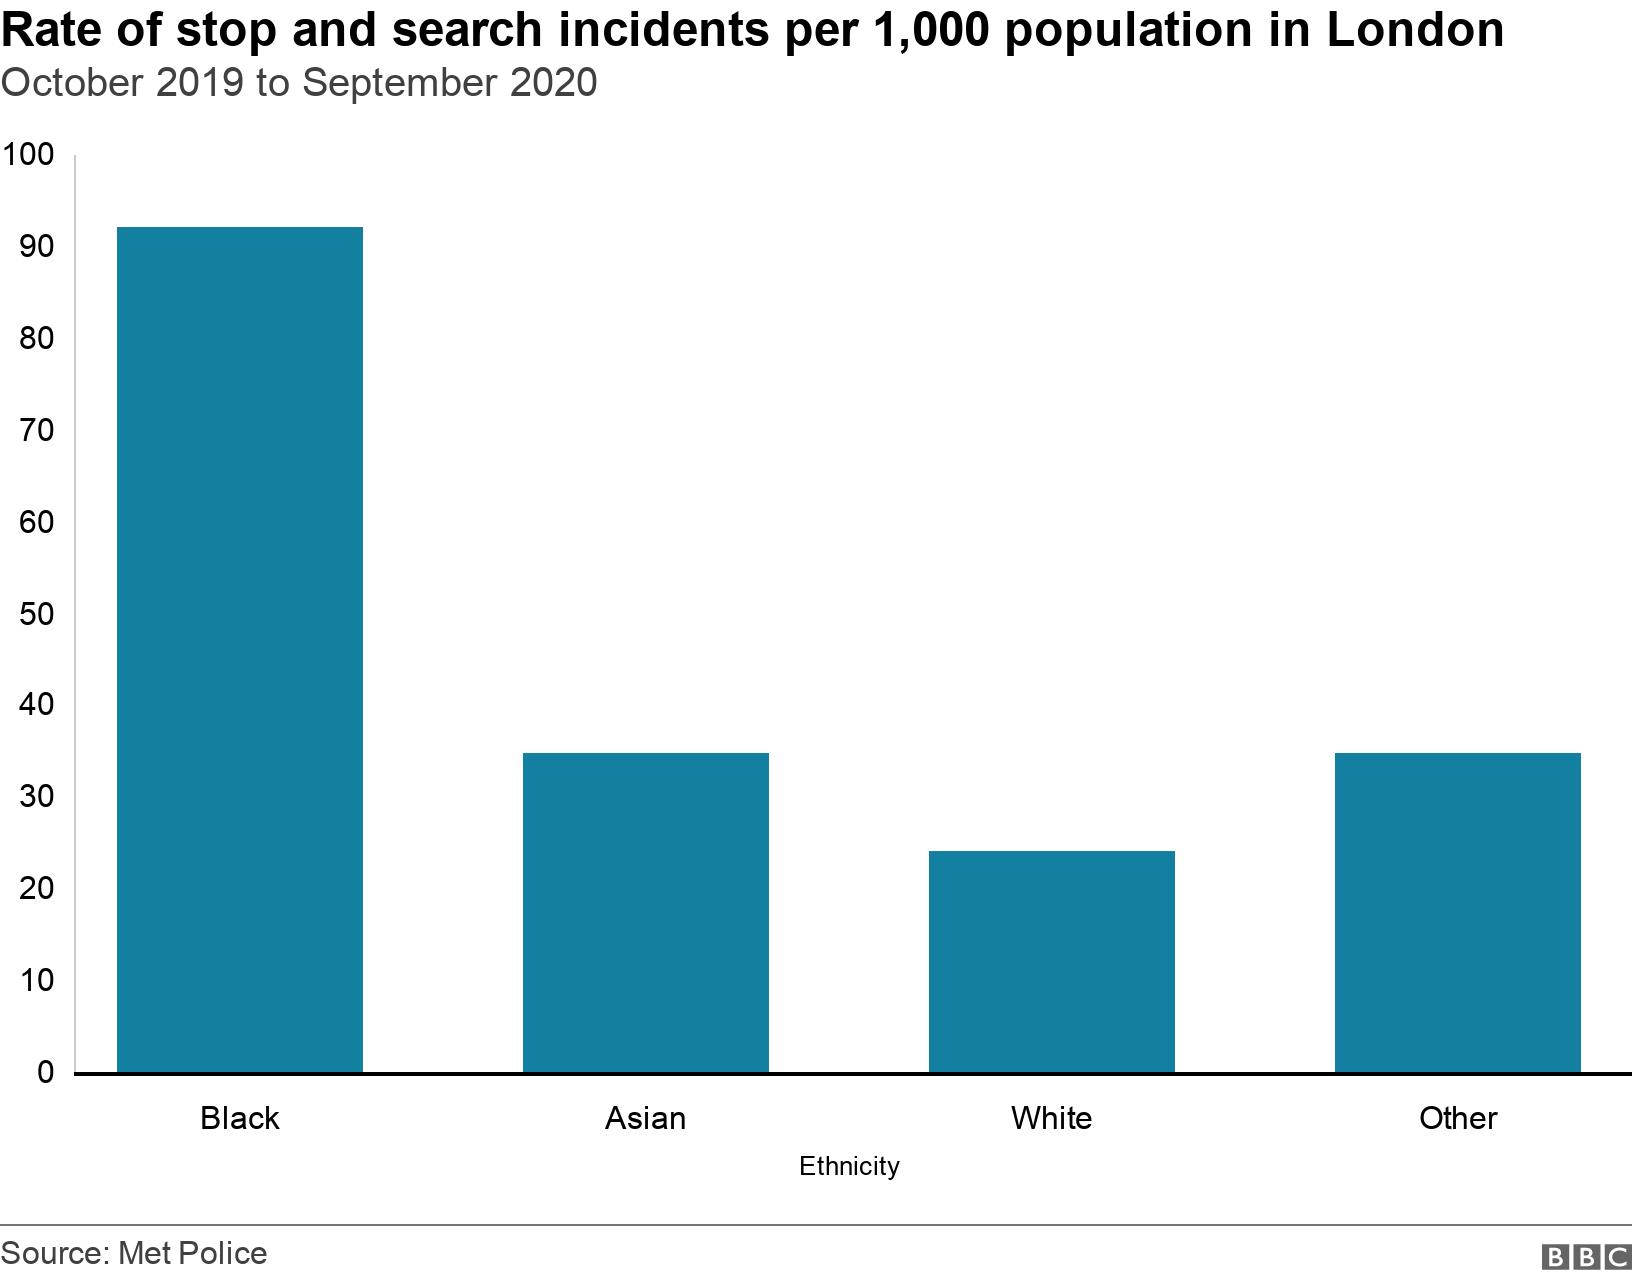 Rate of stop and search incidents per 1,000 population in London. October 2019 to September 2020. .